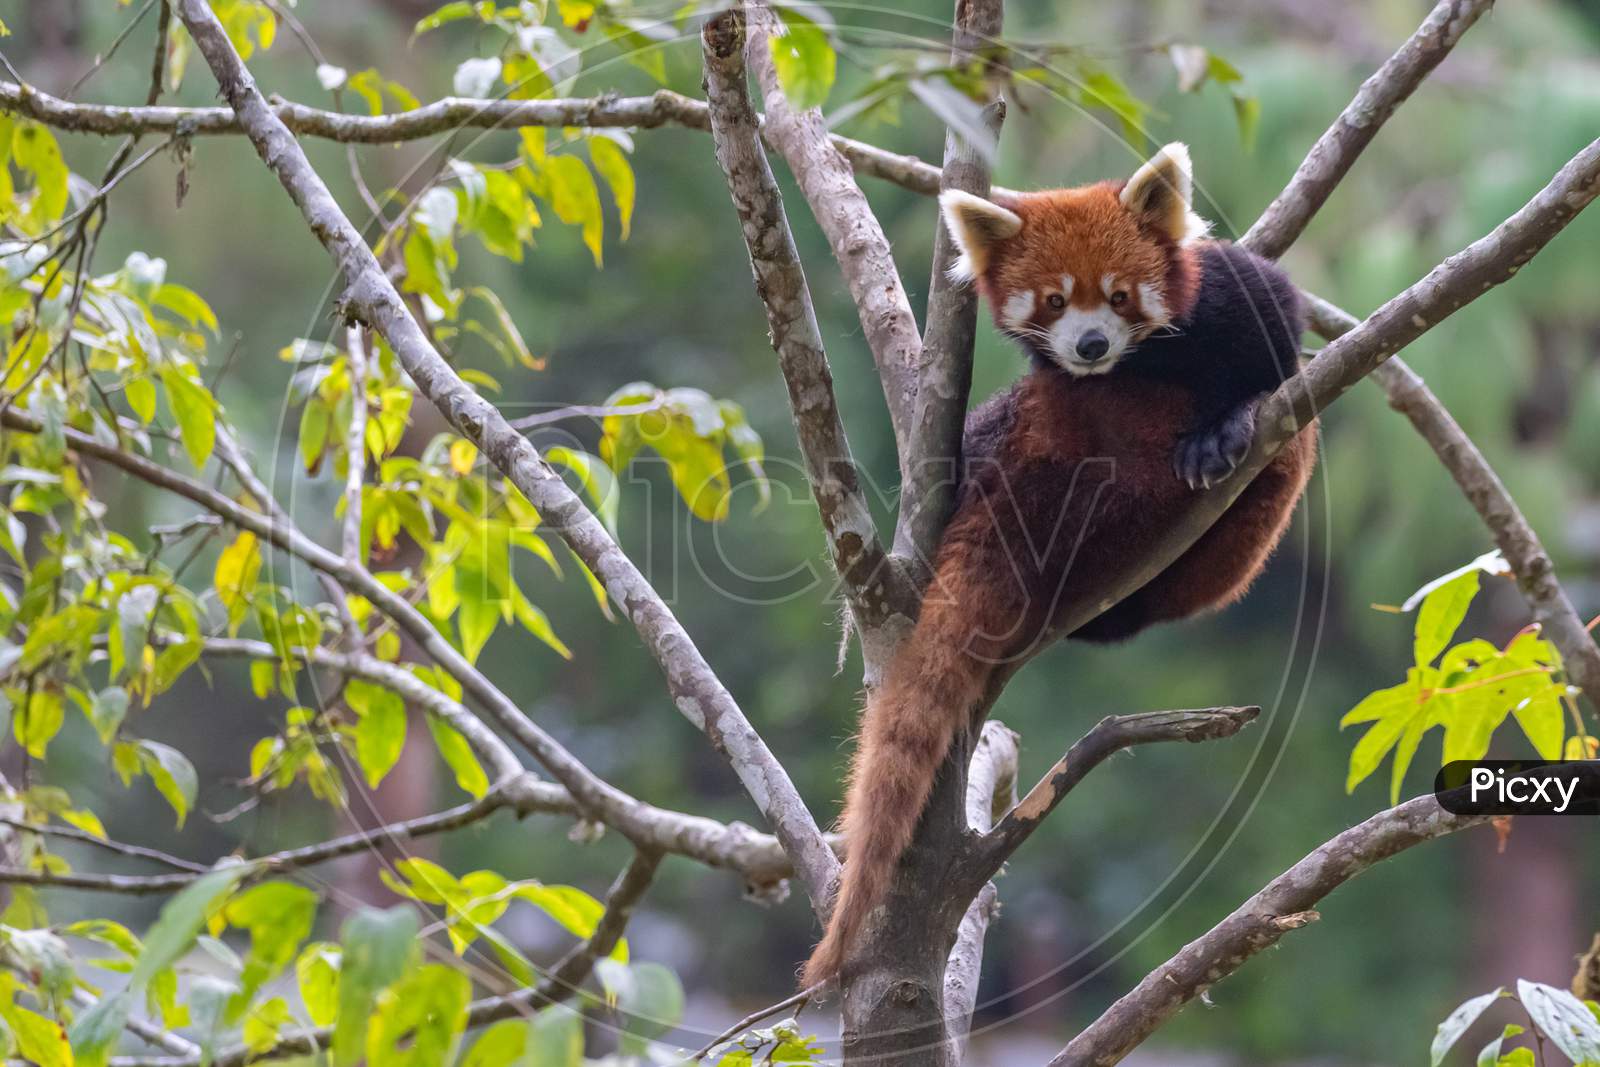 A red panda siting on a tree